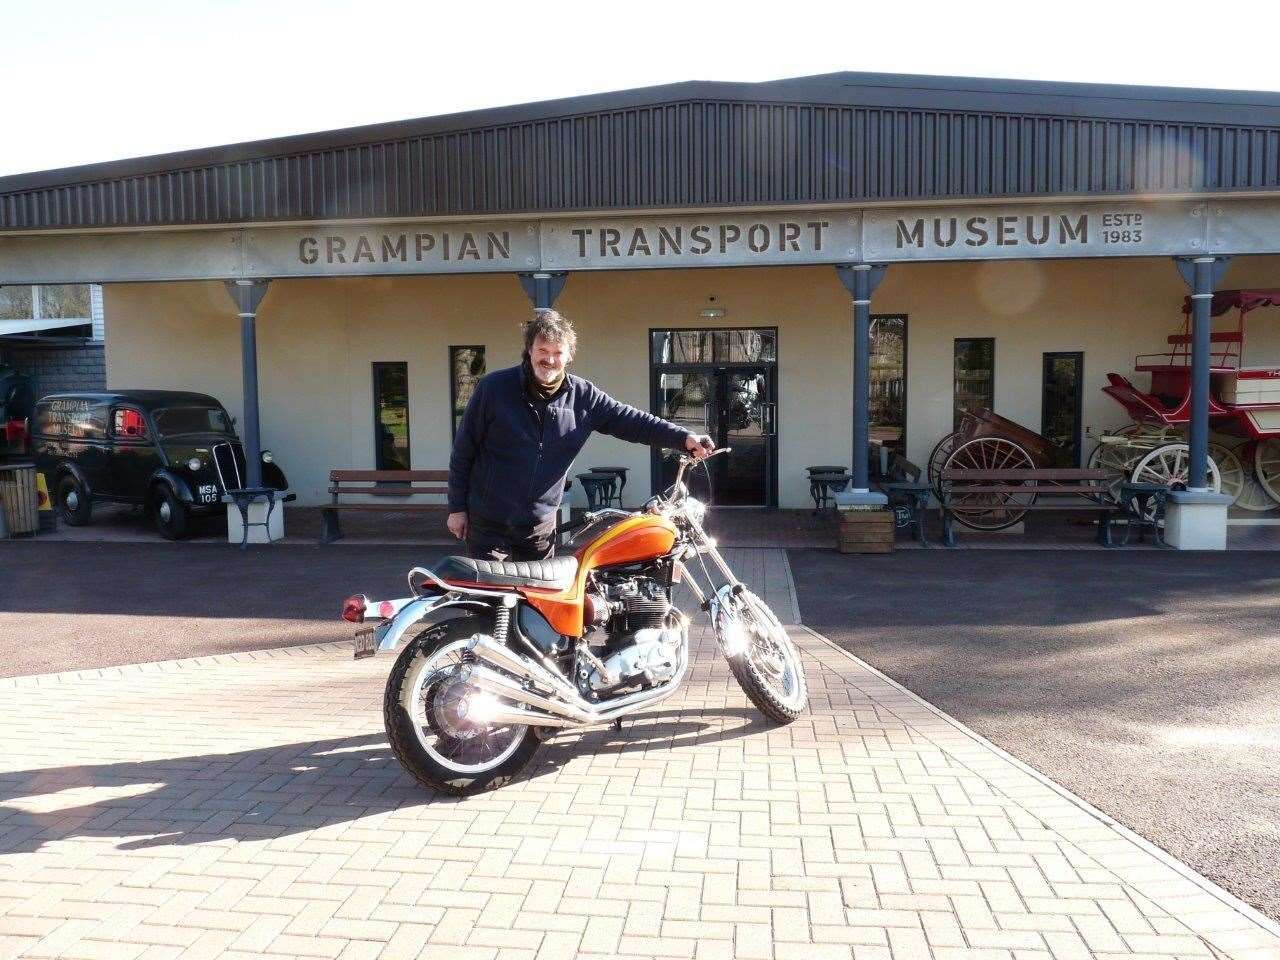 Mike Ward with the Triumph X75